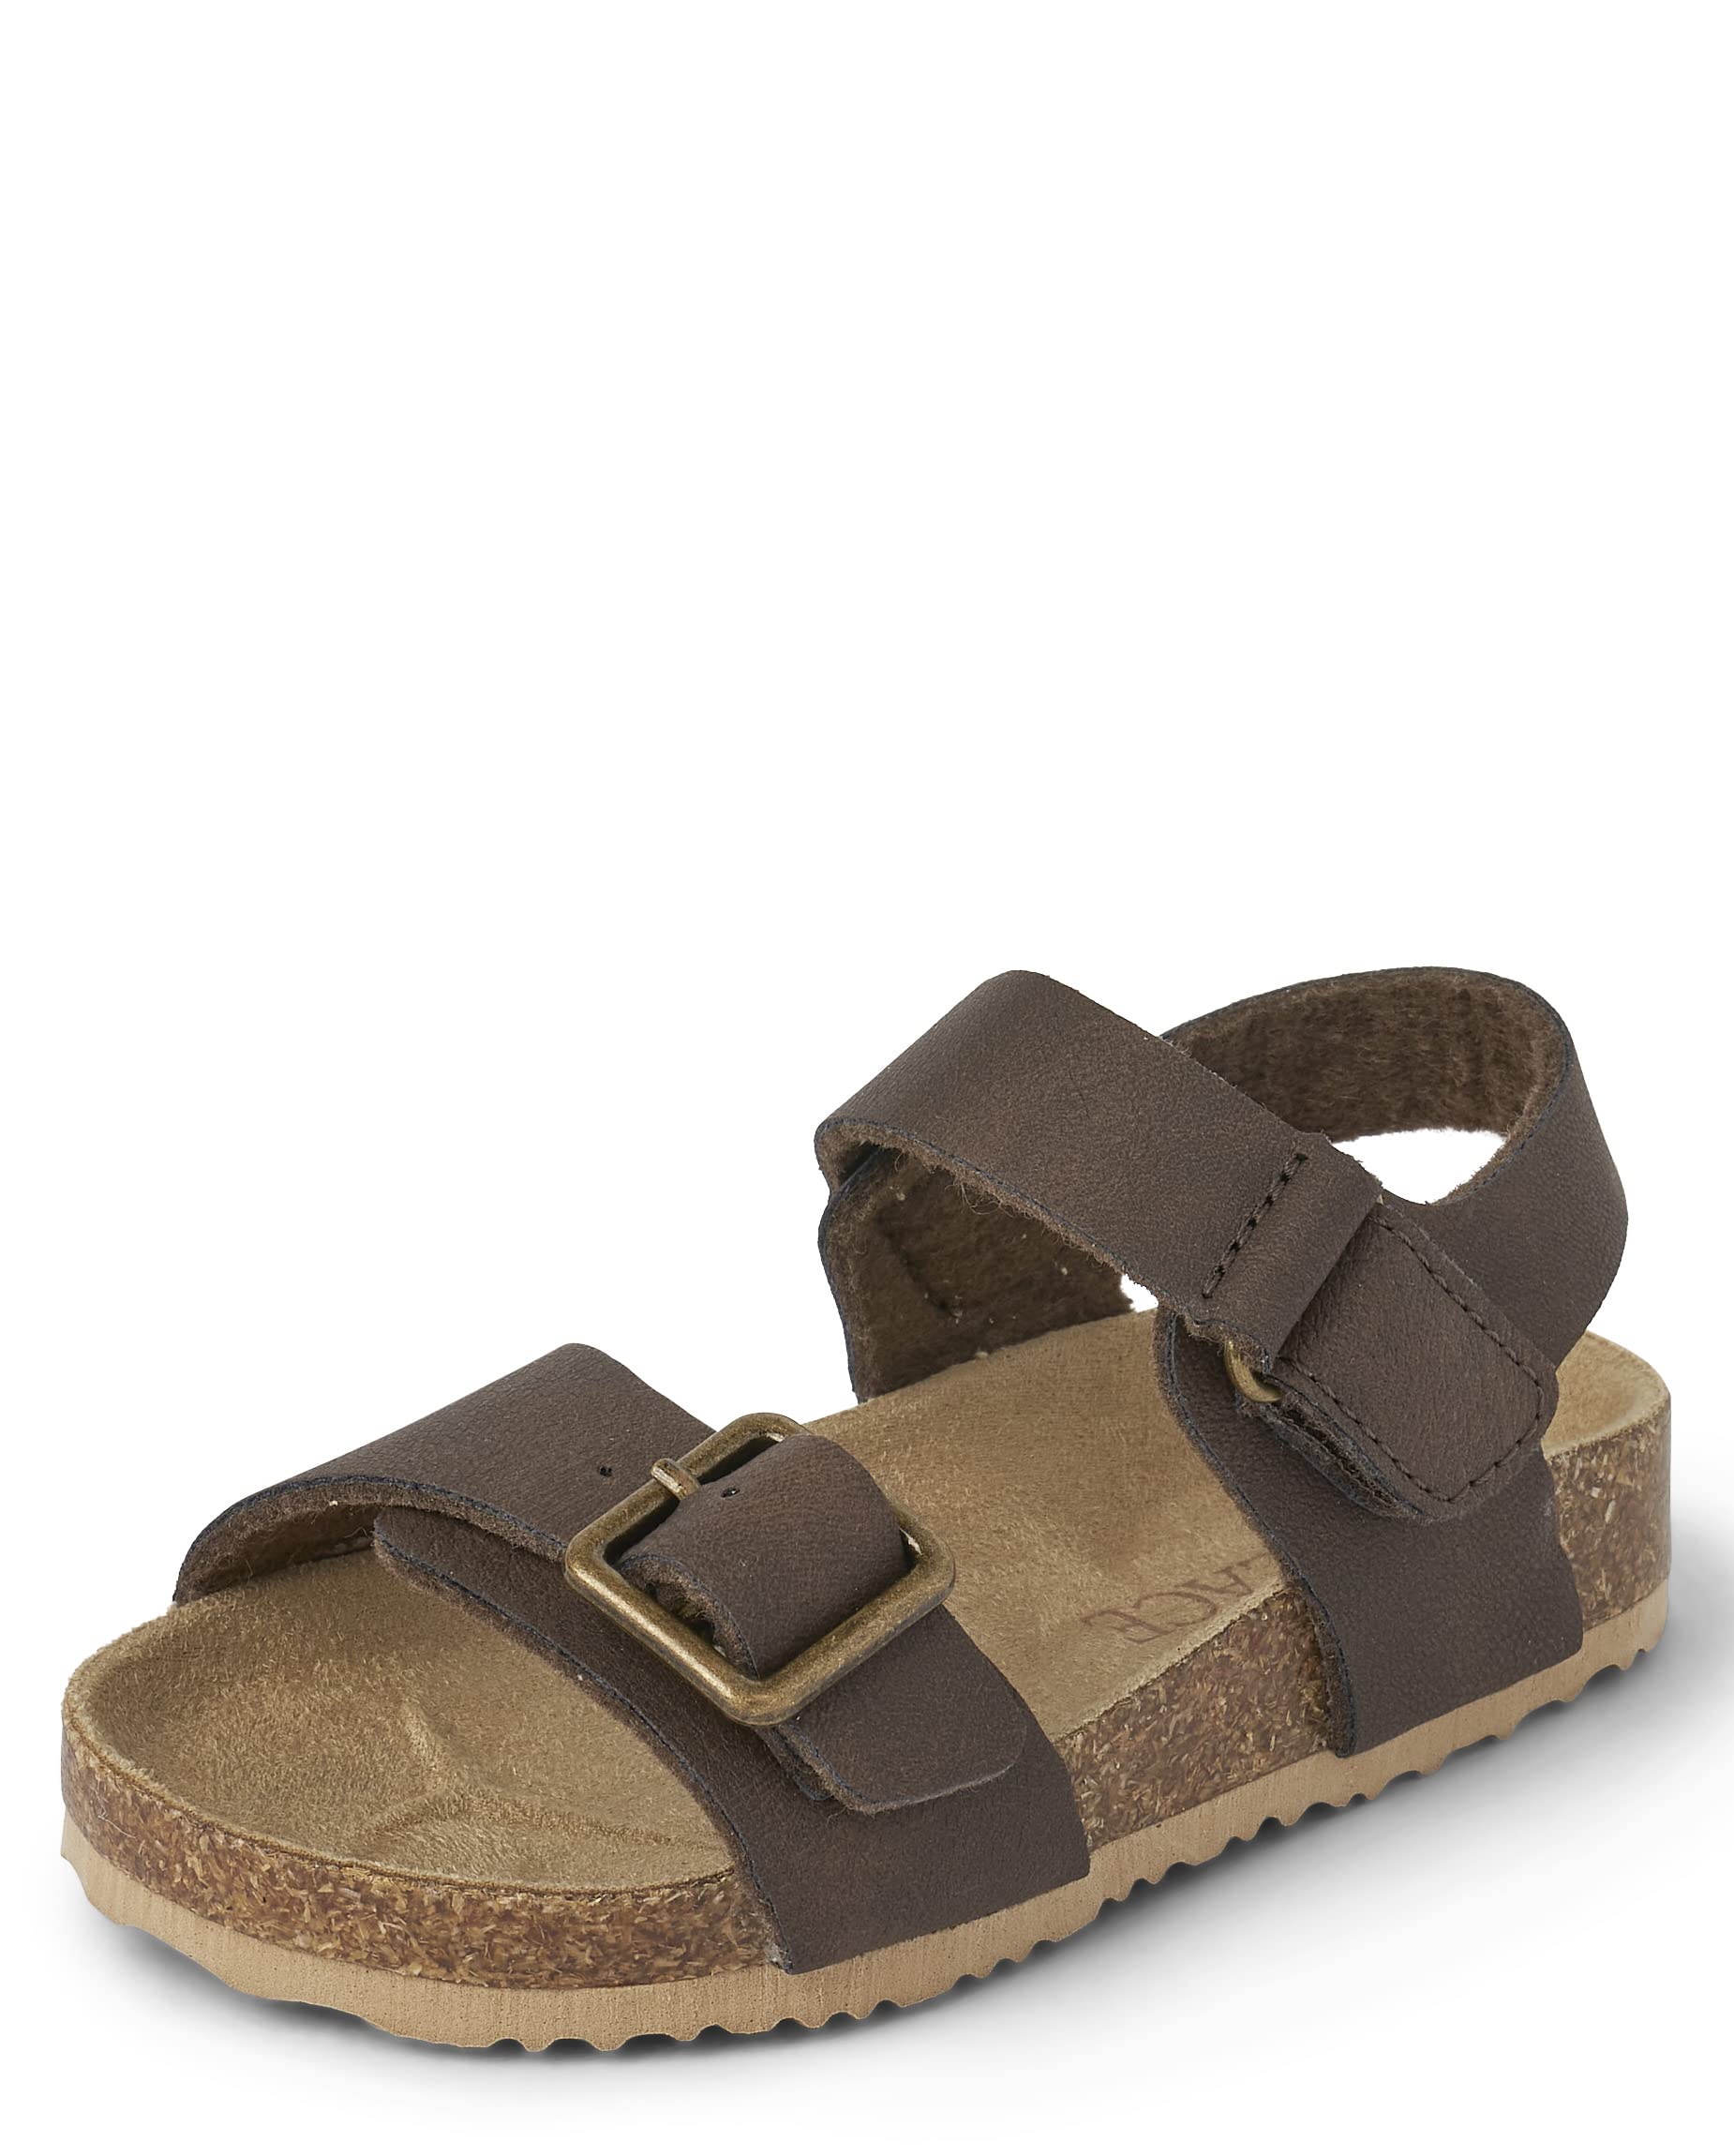 The Children's Place Toddler Boys Buckle Sandals Slide, Browns, 5